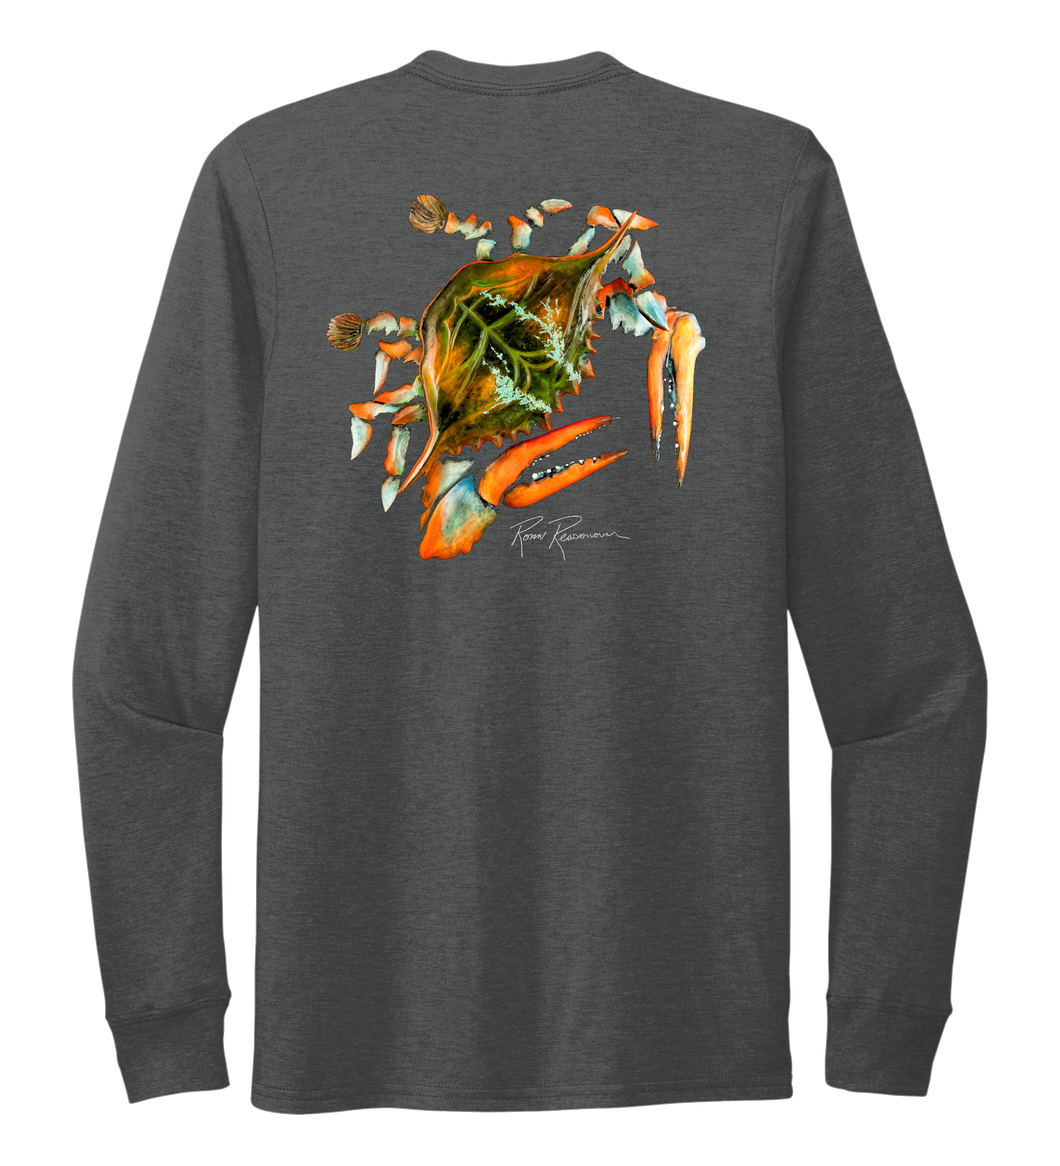 Ronnie Reasonover, The Crab, Crew Neck Long Sleeve T-Shirt in Slate Black